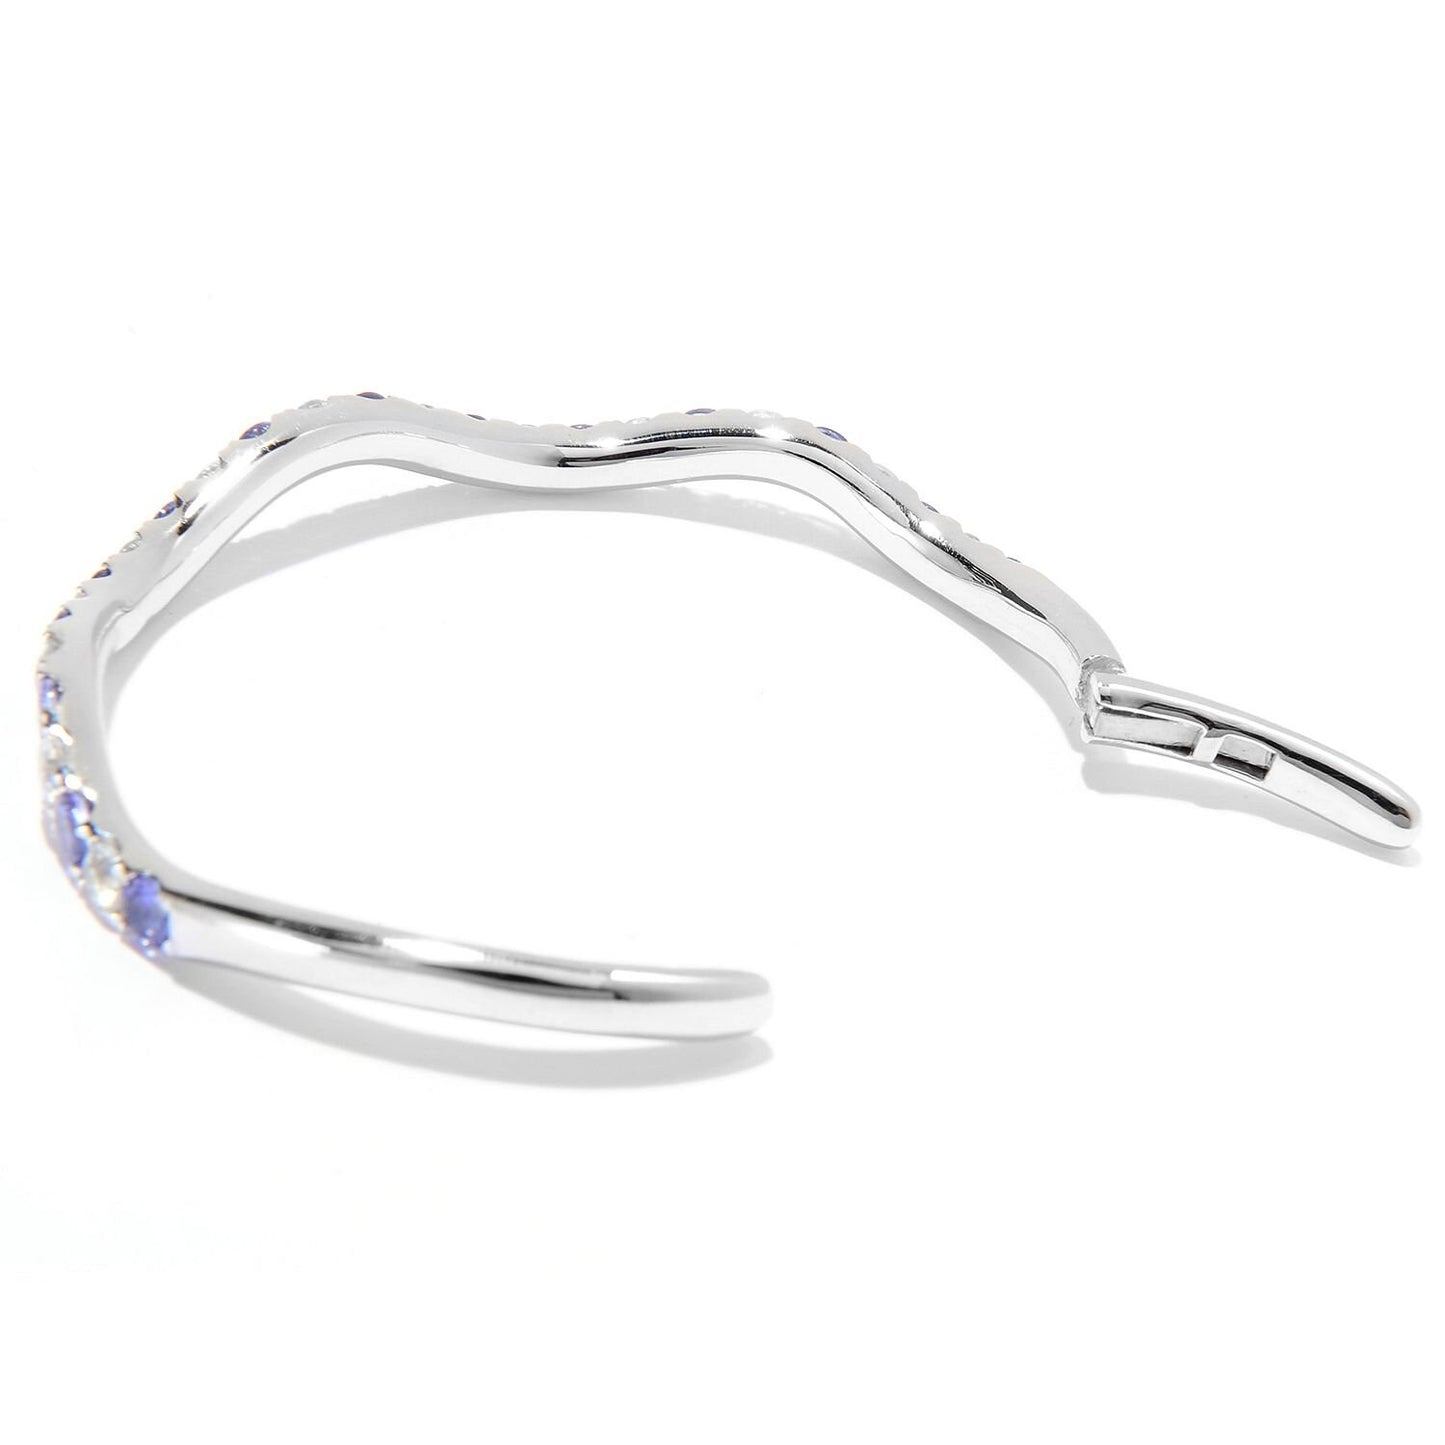 Natural Tanzanite With White Zircon Gemstone Bangle Wave Bangle 925 Sterling Silver Bangle Anniversary Gift Gift For Her